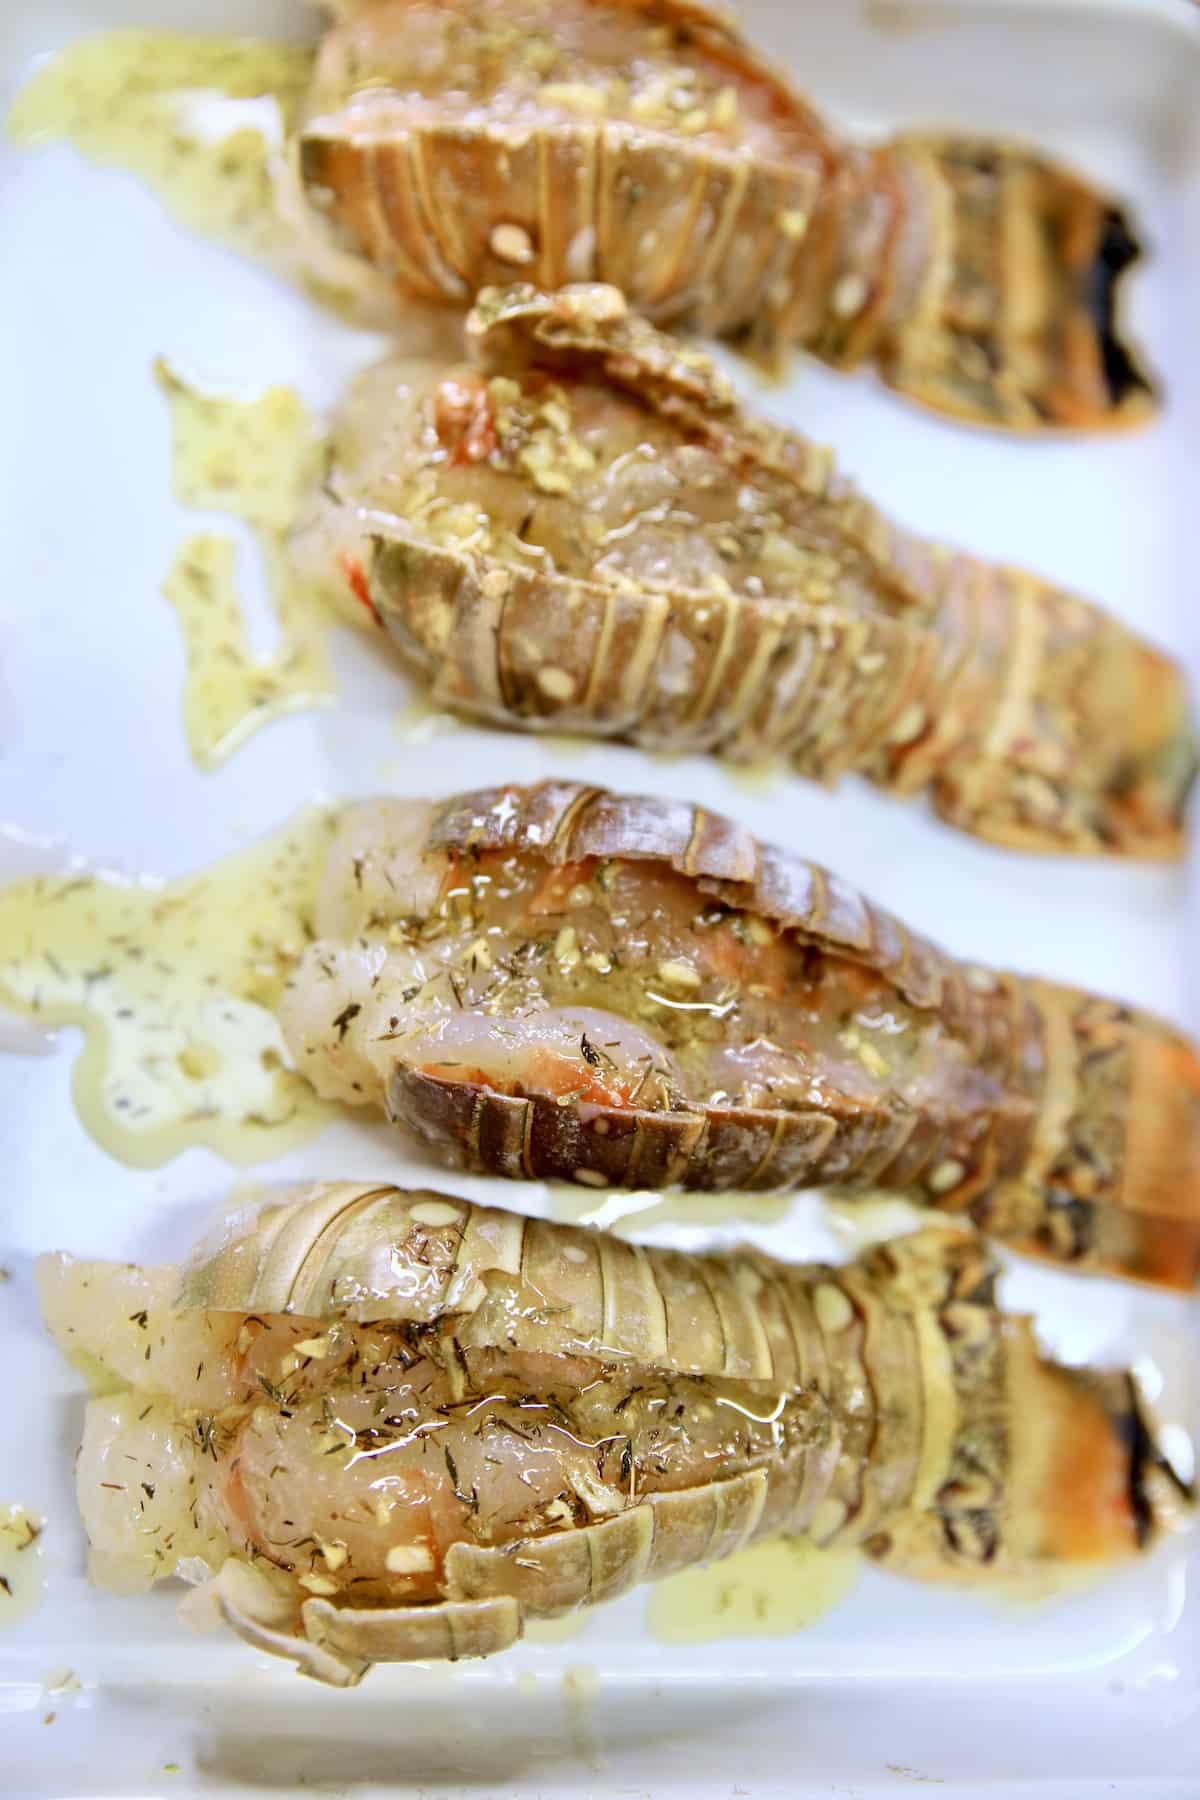 Lobster tails, split with garlic butter.